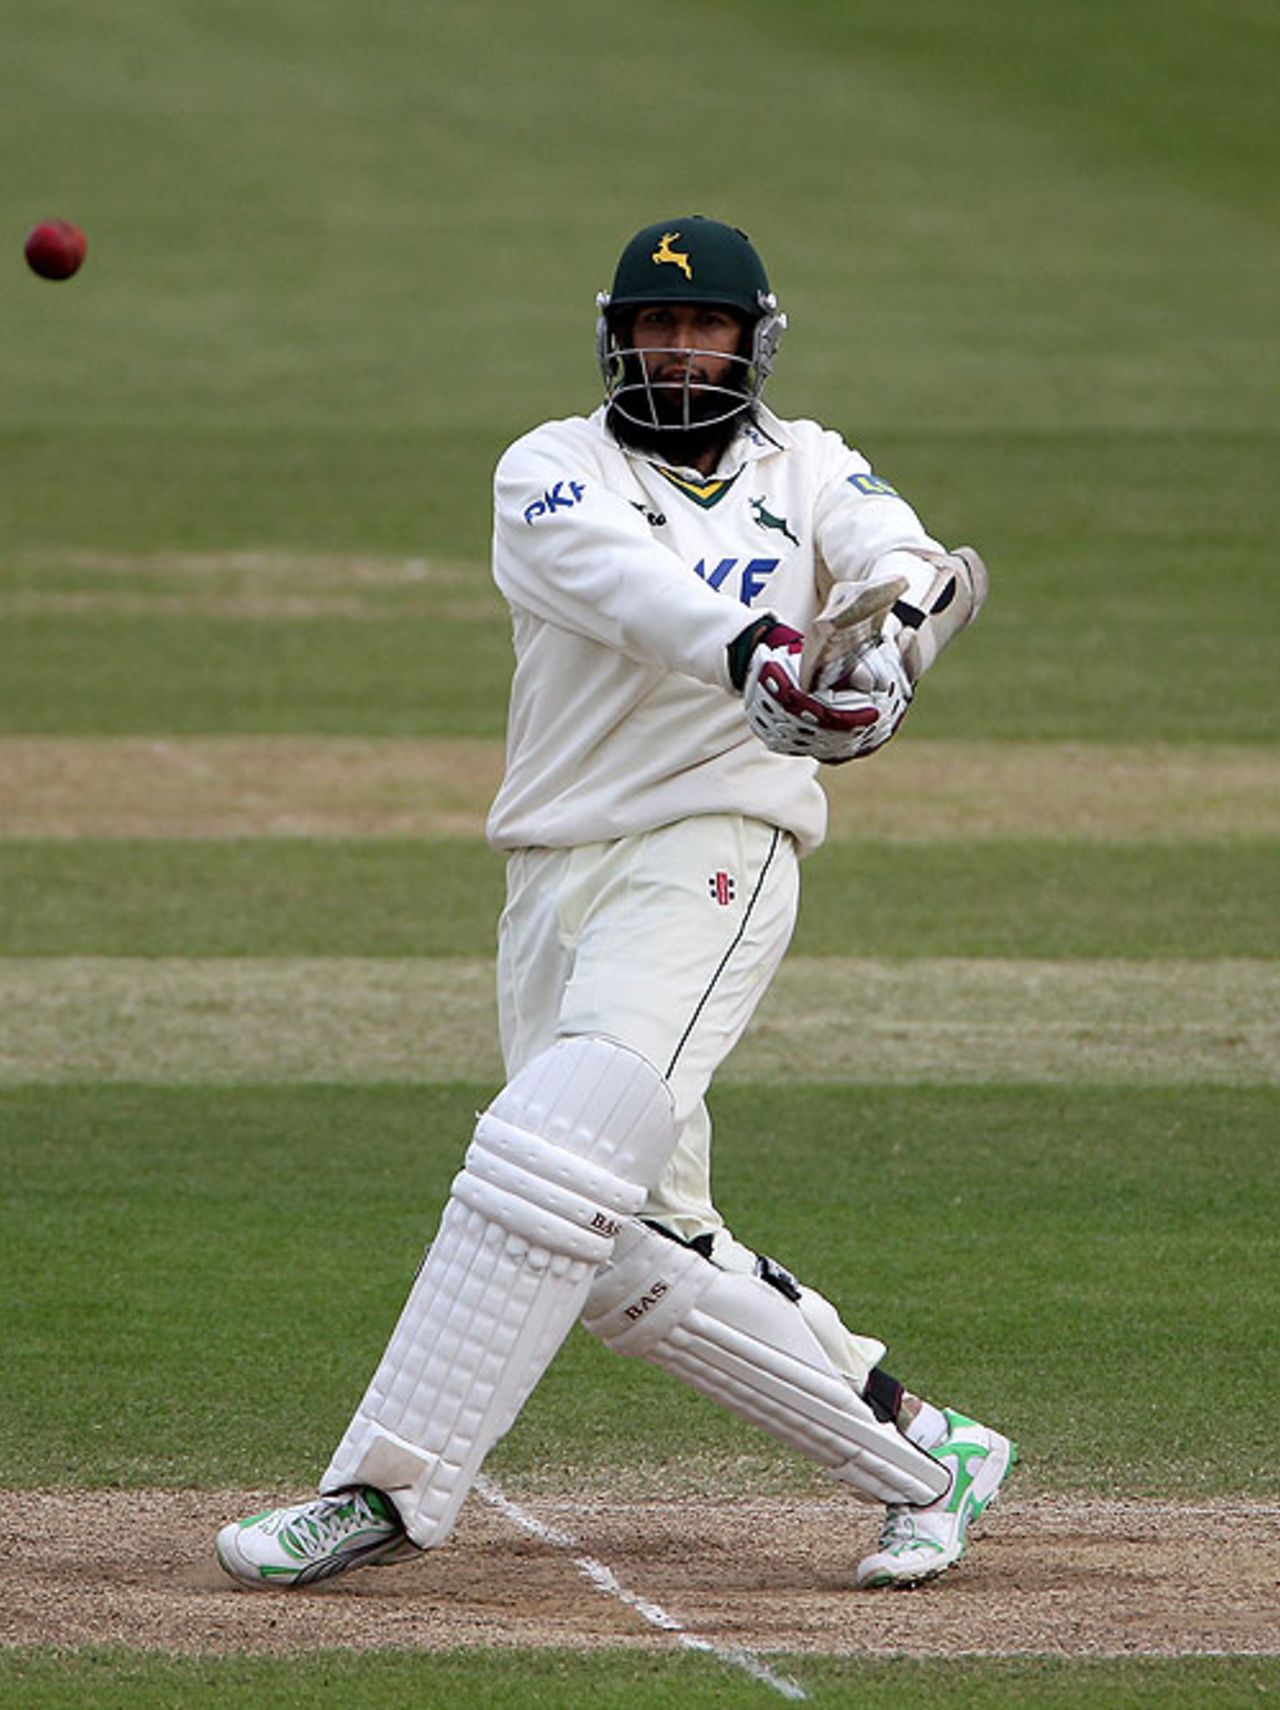 Hashim Amla pulls in front of square during his final-day half-century, Hampshire v Nottinghamshire, County Championship Division One, Rose Bowl, Day 4, May 7, 2010